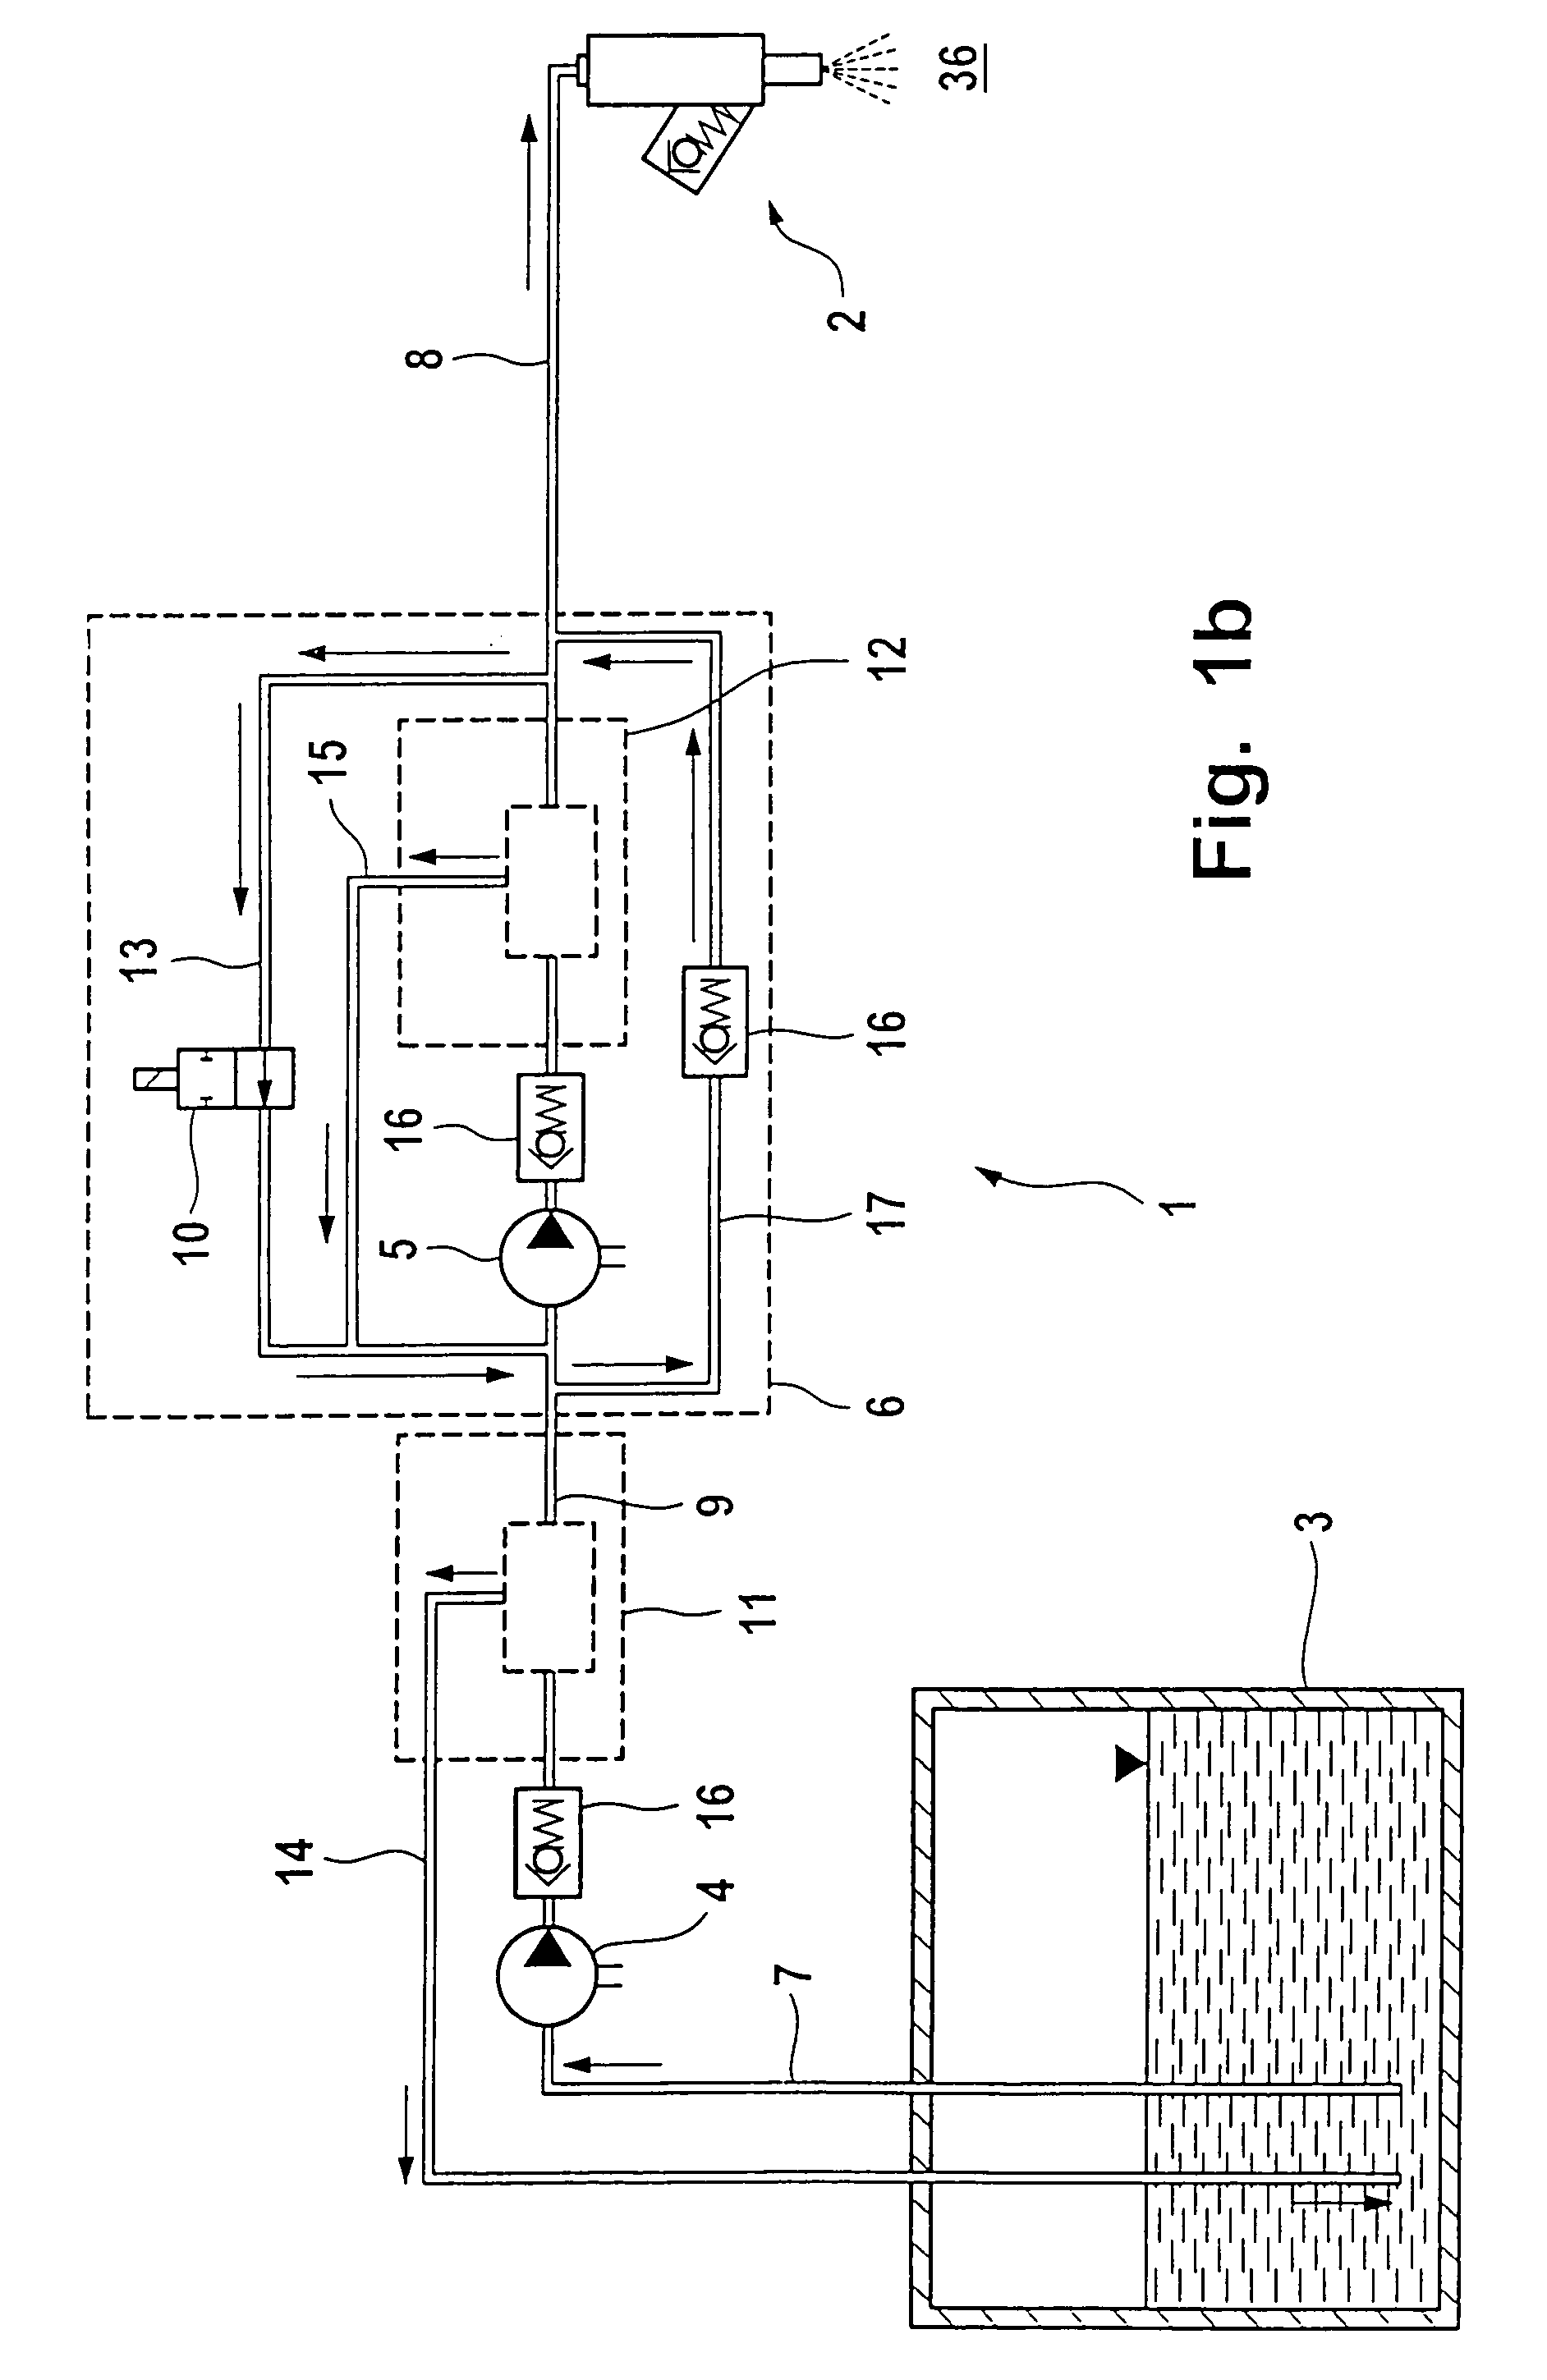 Arrangement for supplying fuel to the fuel injectors of an internal combustion engine